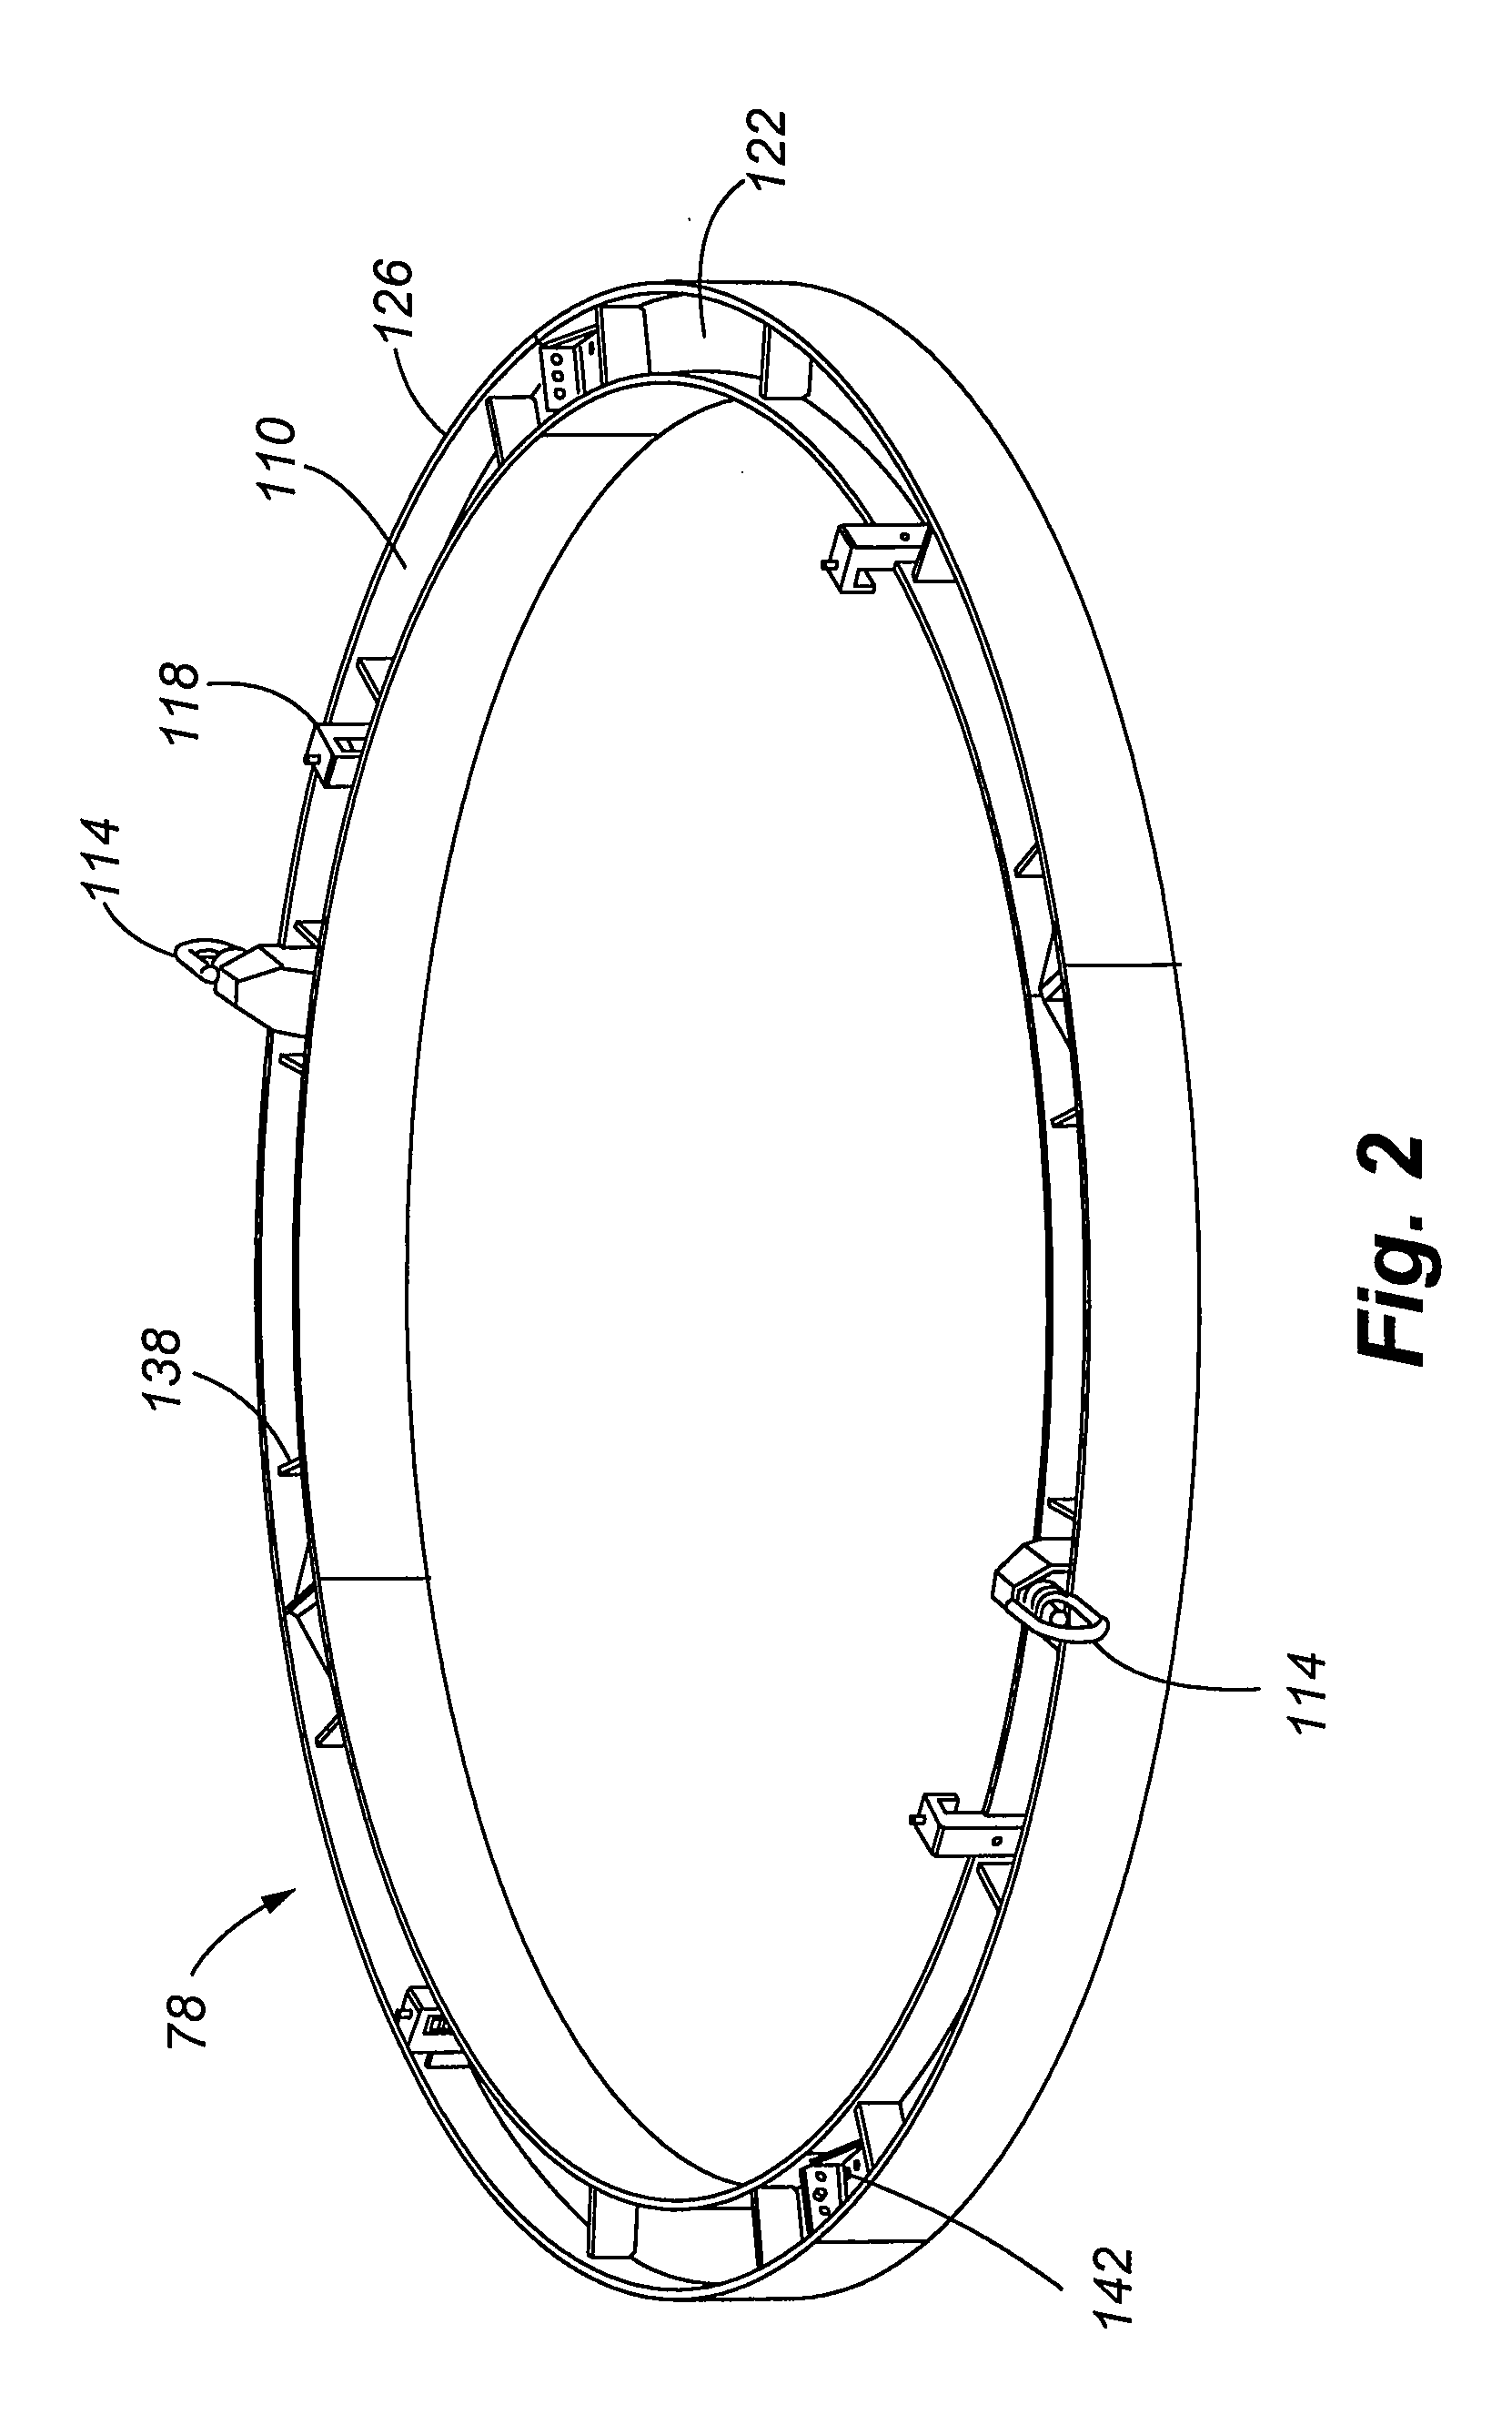 Friction stir welding apparatus, system and method